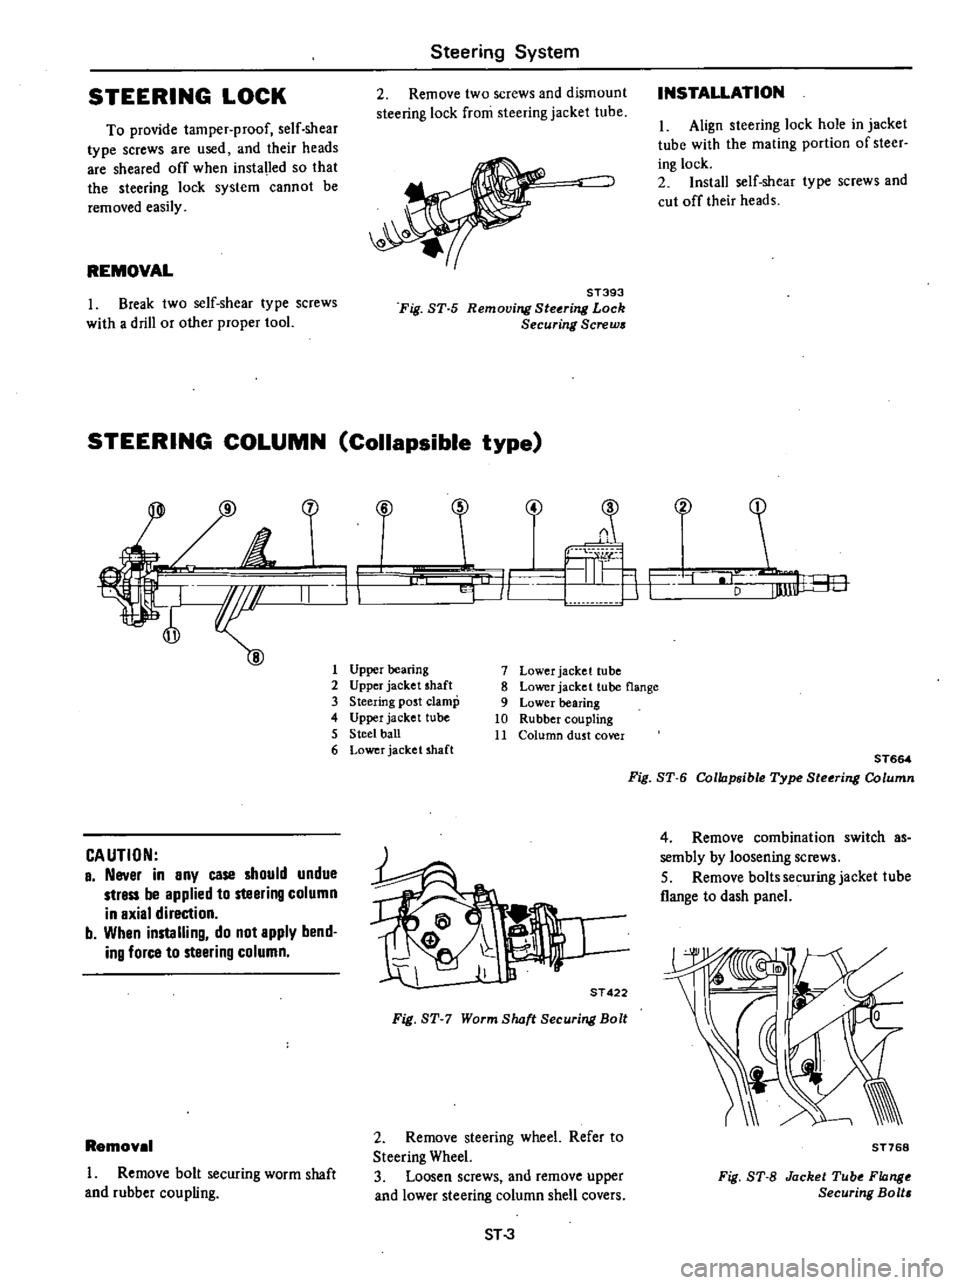 DATSUN 210 1979  Service Manual 
STEERING 
LOCK

To

provide 
tamper

proof 
self 
shear

type 
screws 
are 
used 
and 
their 
heads

are 
sheared 
off 
when 
installed

so 
that

the

steering 
lock

system 
cannot 
be

removed

ea